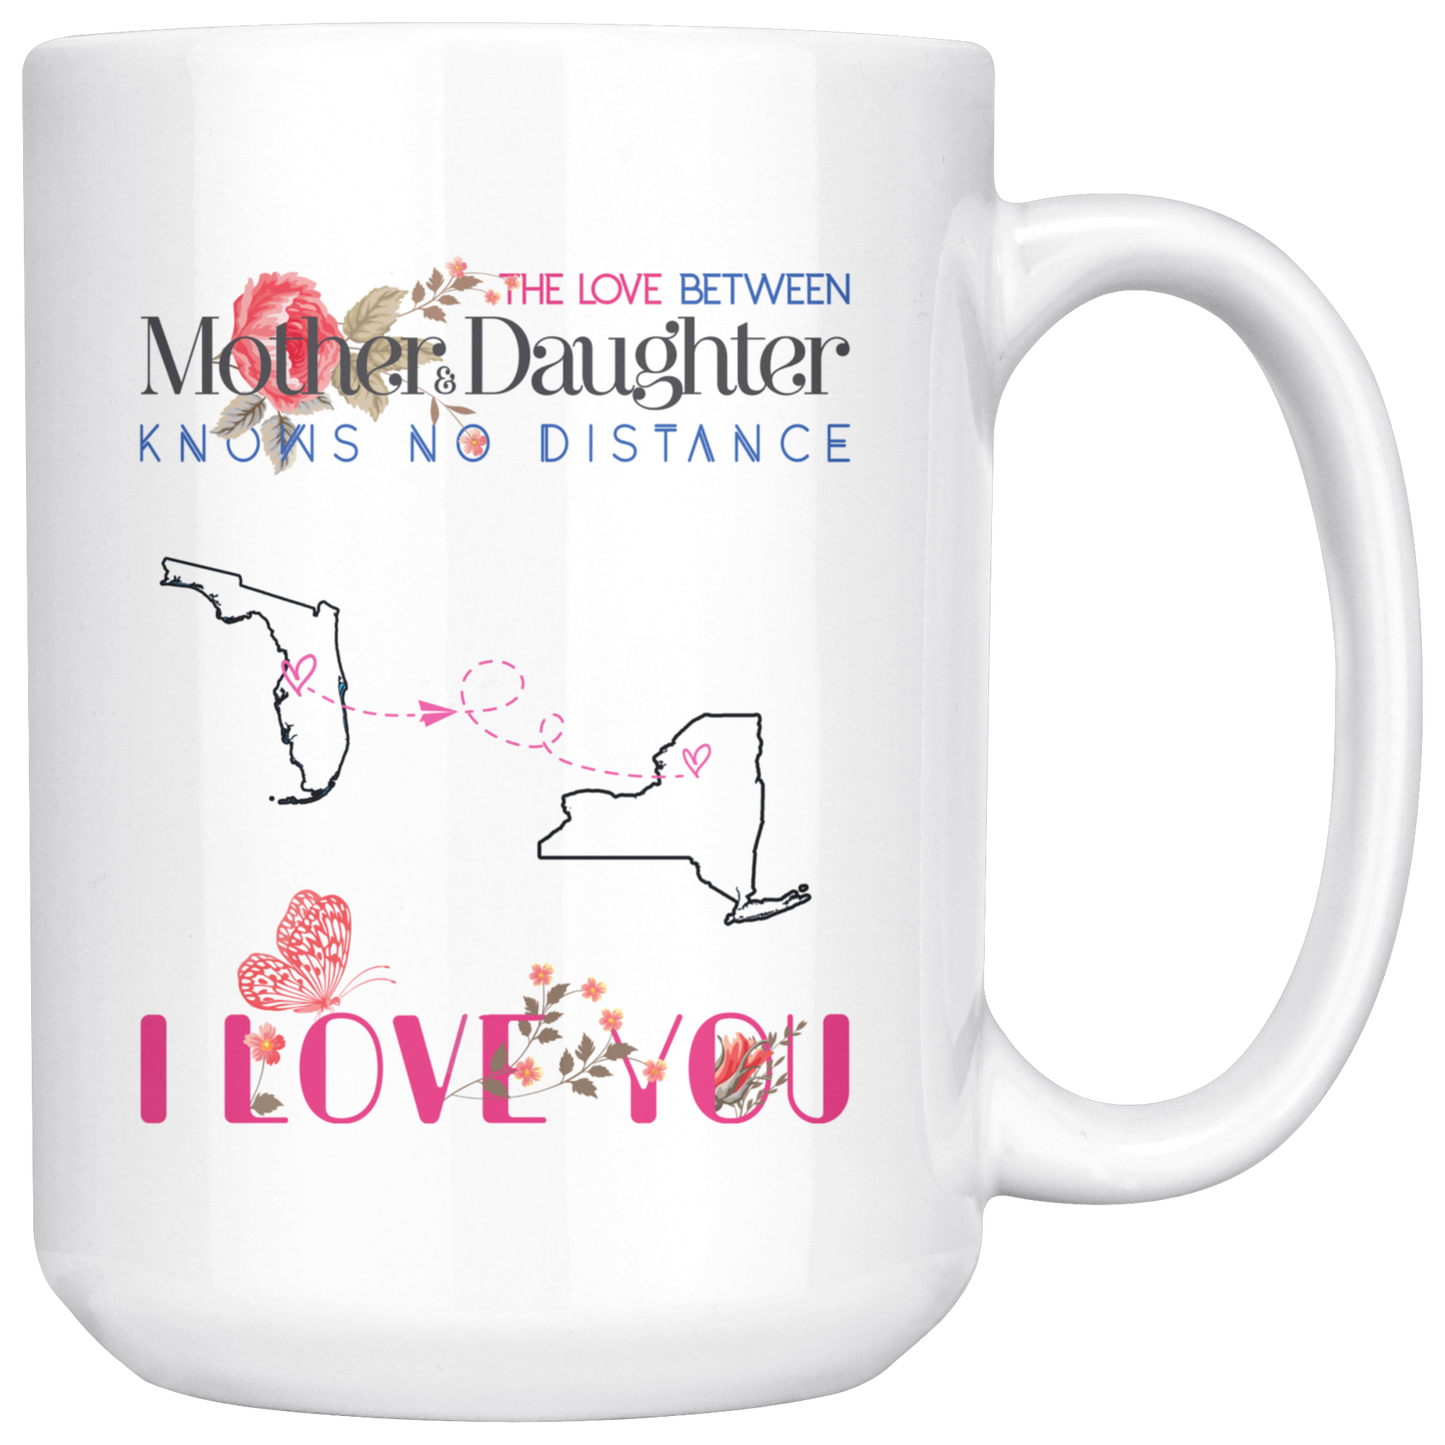 M-20377376-sp-24017 - [ Florida | New York | 1 ]Mothers Day Gift For Daughters Florida New York The Love Bet